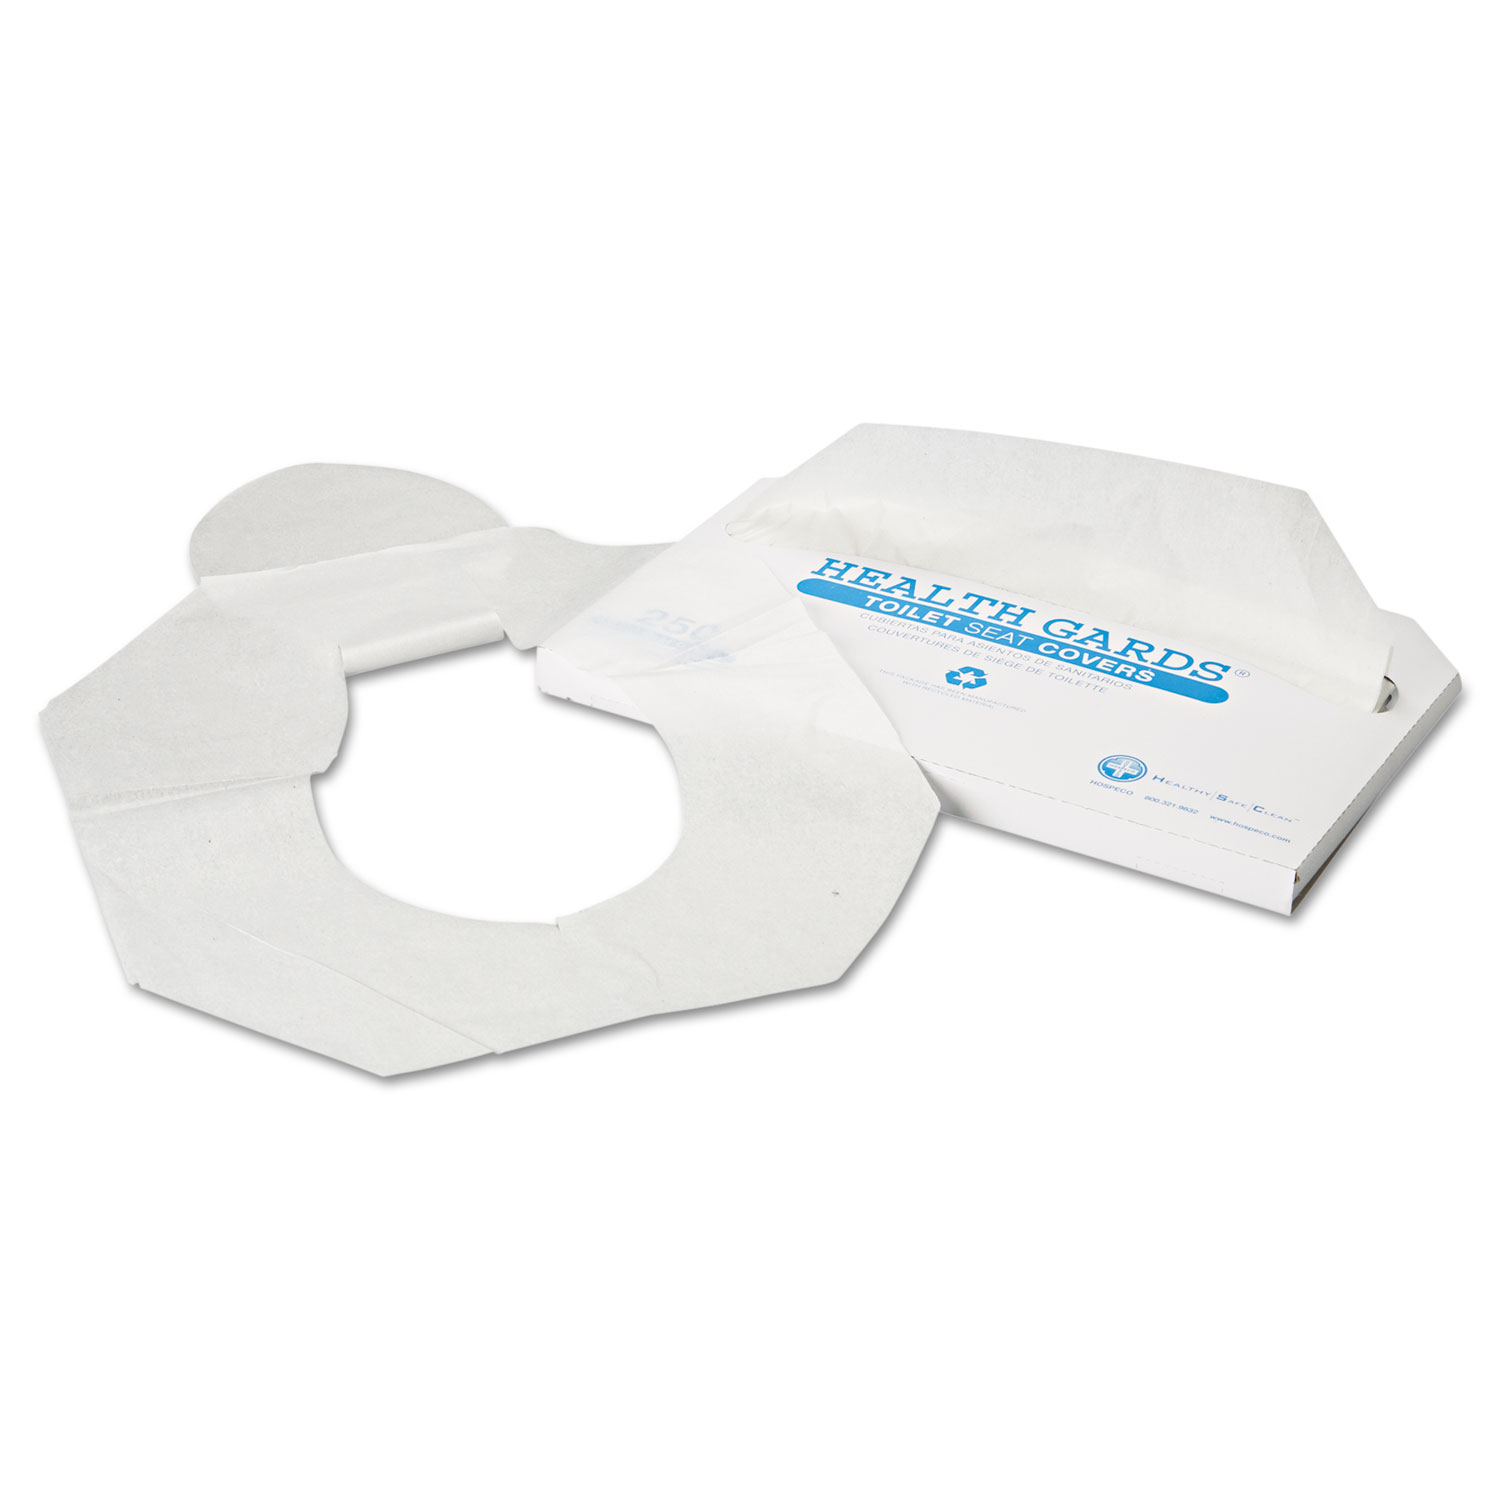 Case of 5000 Brighton Professional Half-fold Toilet Seat Covers BPR24775 072218 for sale online 